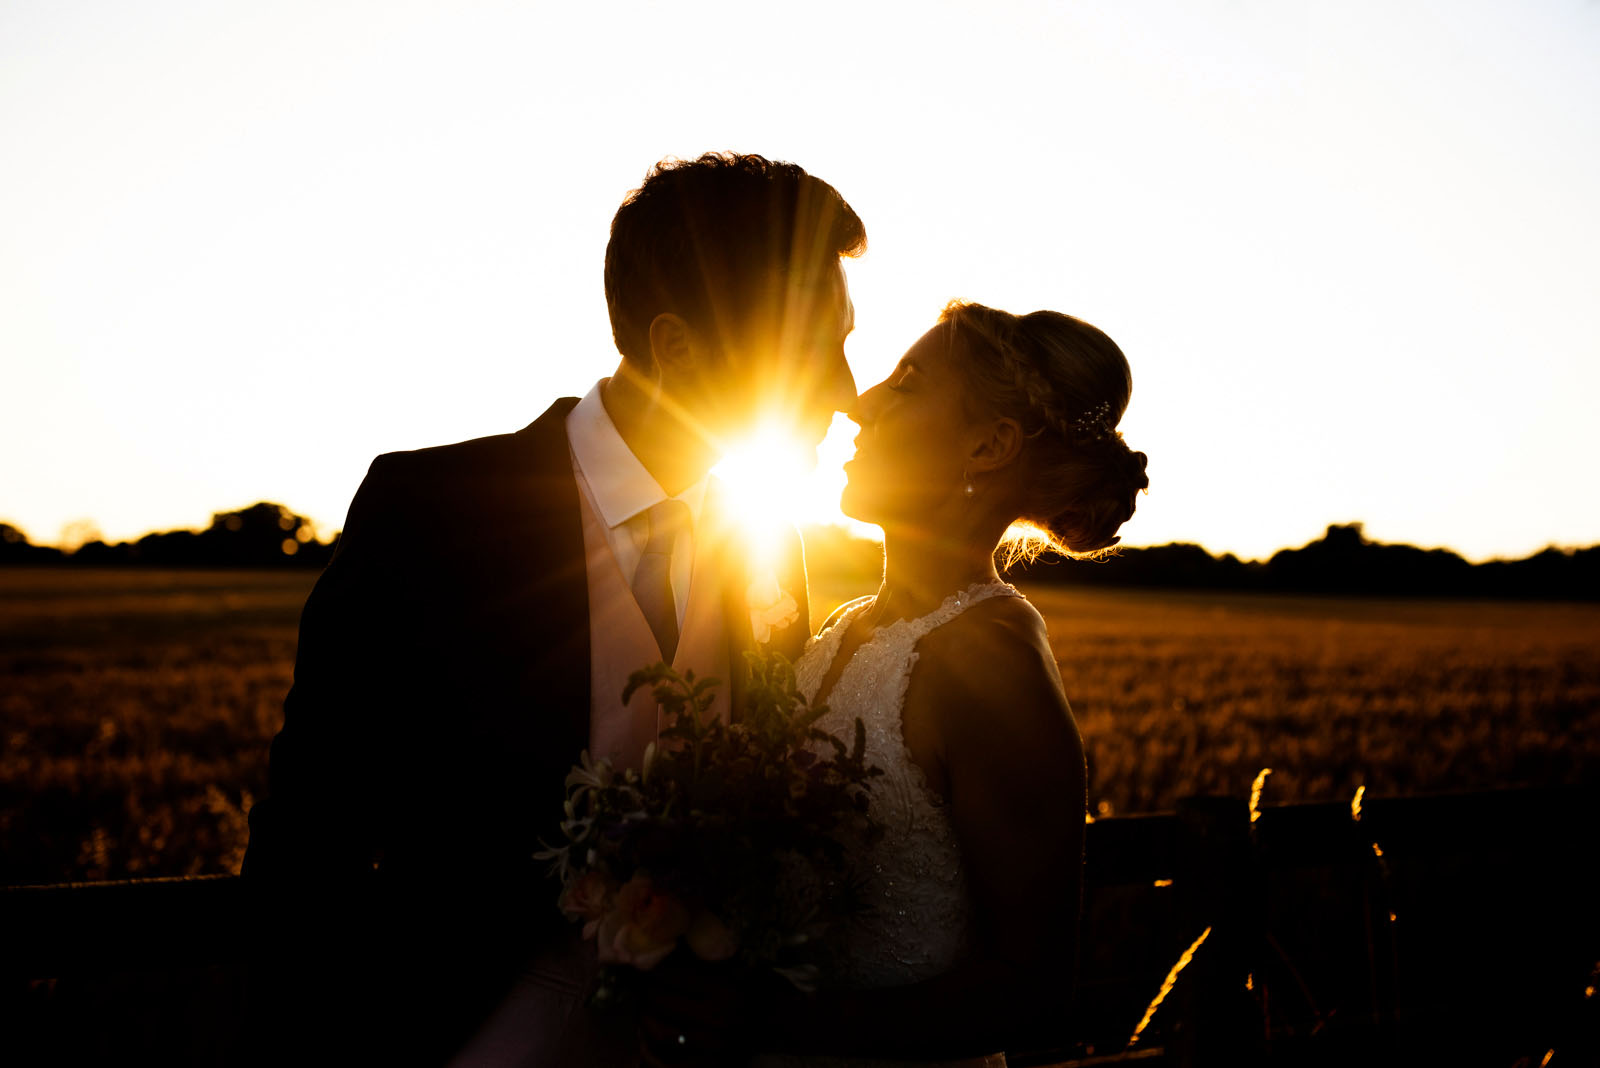 Backlit bride and groom photos at sunset.